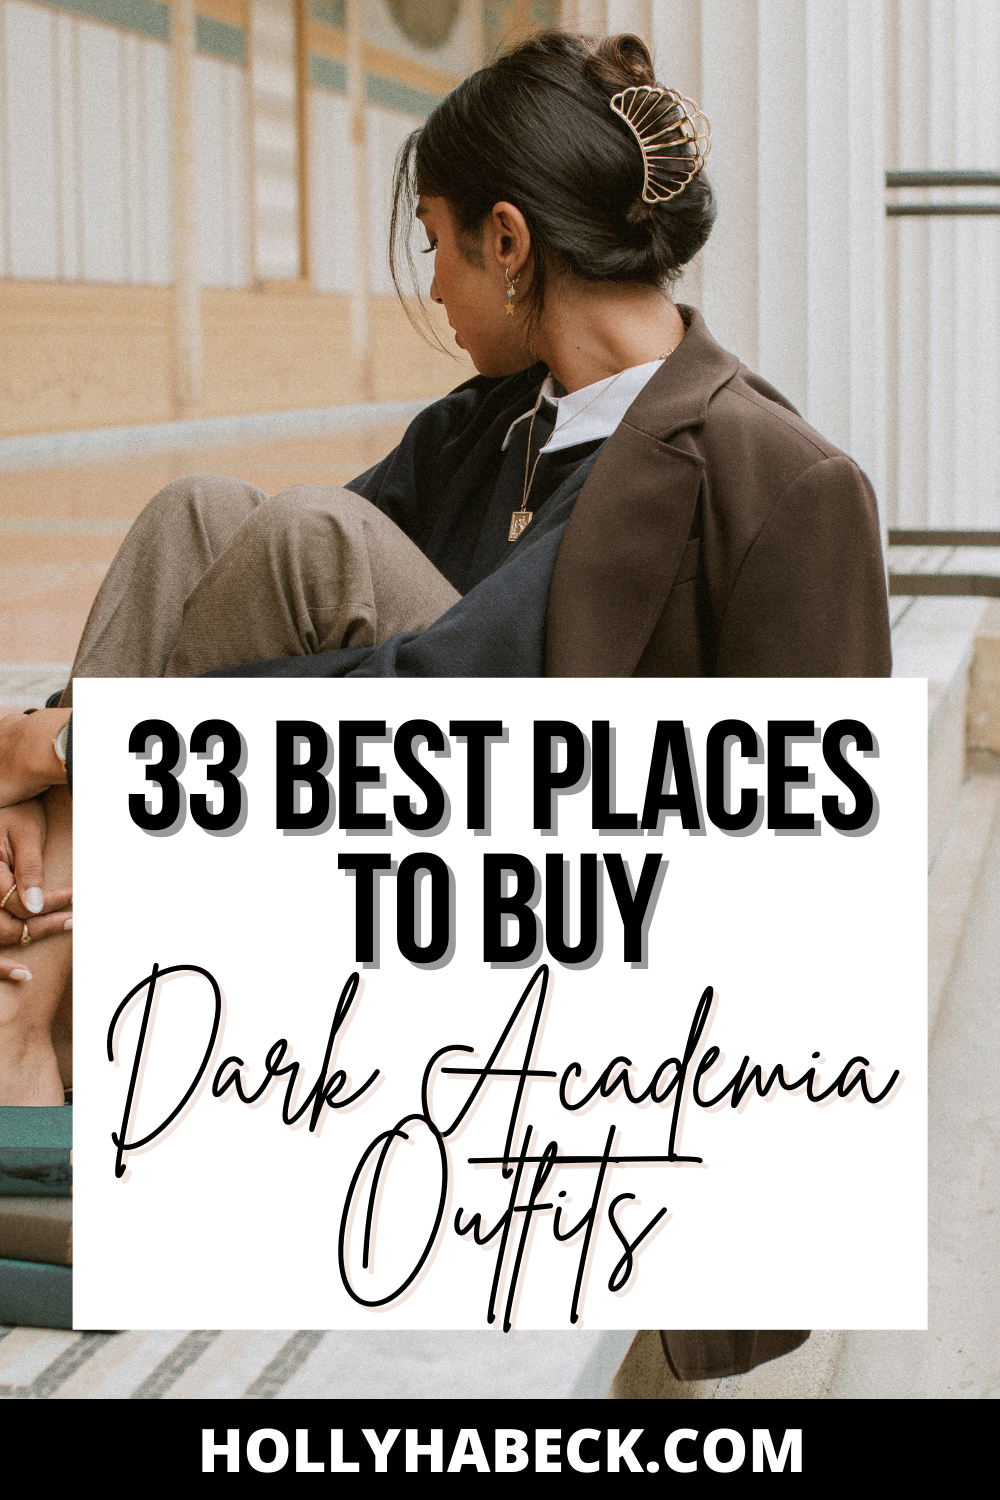 Dark Academia Outfits: How to Effortlessly Create This Aesthetic